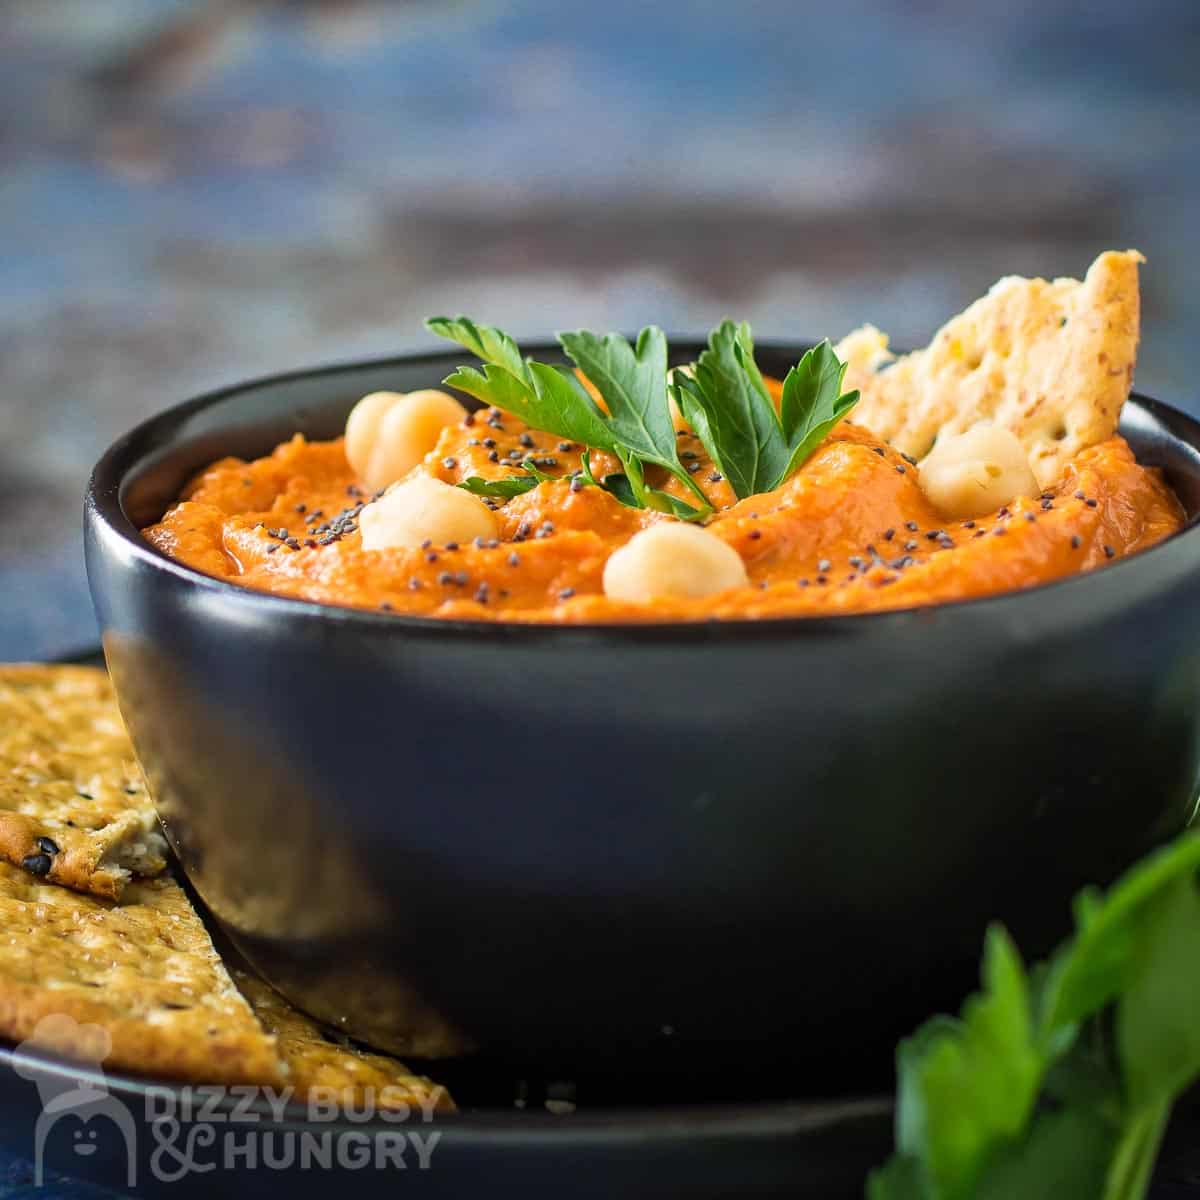 Side close up shot of red pepper hummus in a black bowl on a black plate garnished with pepper, chickpeas, and herbs, and crackers on the side.